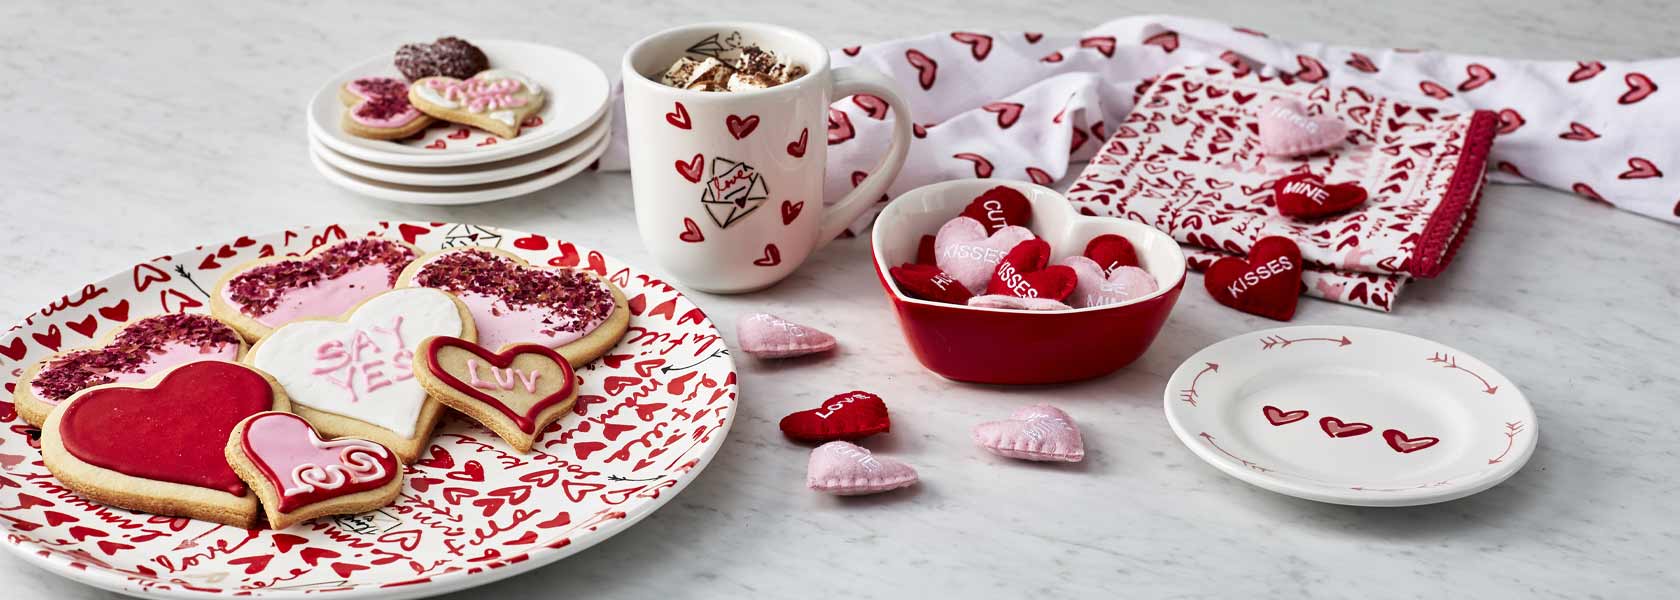 Valentine's Day decor and decorated heart cookies